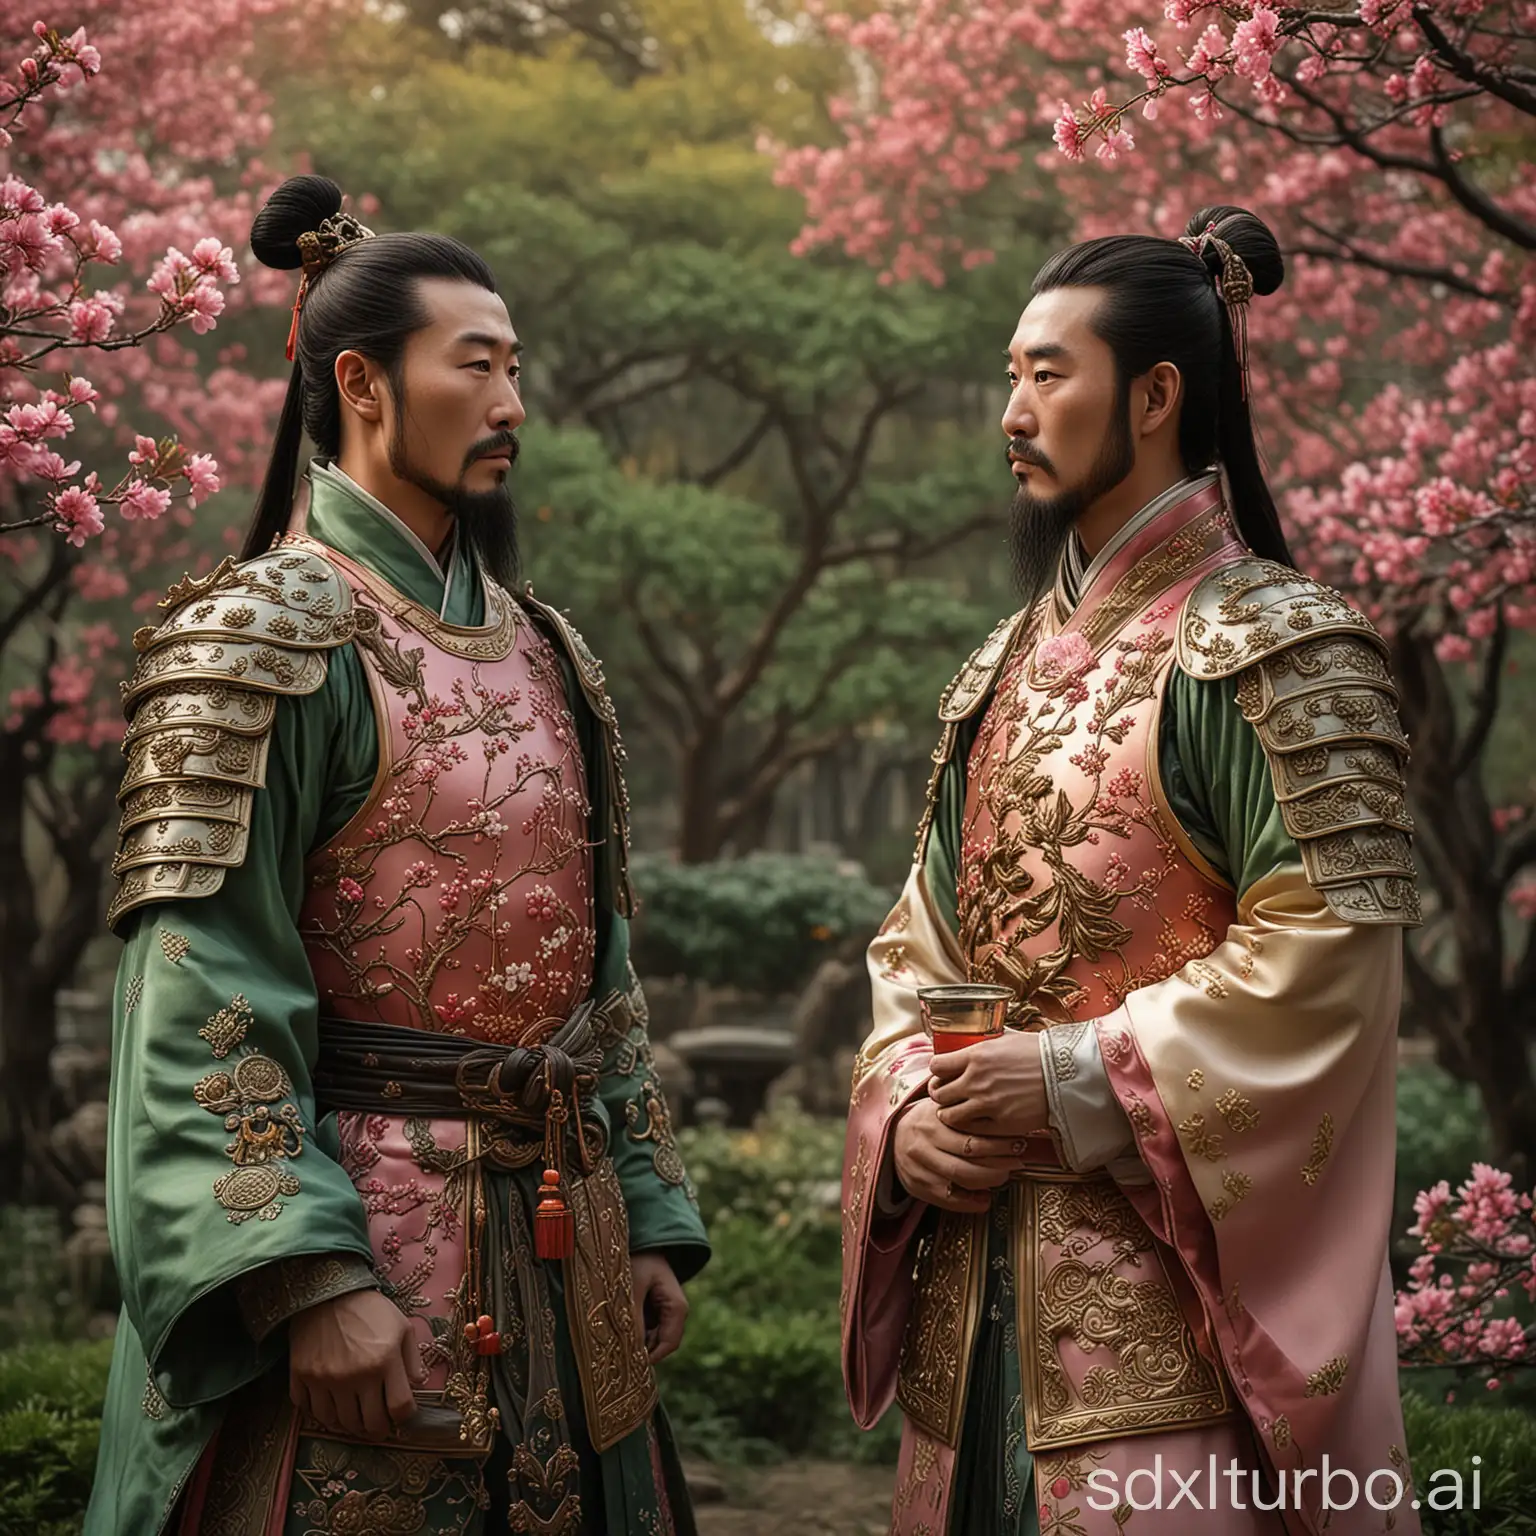 "A photorealistic scene set against the backdrop of the Three Kingdoms period, depicting the moment where Liu Bei, Guan Yu, and Zhang Fei decide to join forces in the Oath of the Peach Garden (Taoyuan). The three warriors stand together in a lush, blooming peach garden, the trees heavy with vibrant pink blossoms:

Liu Bei stands at the center, his elaborate traditional armor and flowing robes detailed with intricate designs. He holds a cup of wine, his face reflecting determination and the weight of his promise. The light filtering through the blossoms casts a warm glow on his resolute expression.

Guan Yu, on Liu Bei’s right, is dressed in his iconic green robe and ornate armor. His long beard flows gently in the breeze, and his eyes are fierce yet solemn, reflecting his unwavering loyalty. He too holds a cup of wine, raised in a gesture of solidarity.

Zhang Fei, on Liu Bei’s left, is clad in rugged, distinctive armor. His robust physique and intense gaze underscore his warrior spirit and fierce loyalty. He grips his cup firmly, ready to make the solemn vow alongside his brothers.

The peach blossoms around them are rendered in exquisite detail, their vibrant colors contrasting with the warriors’ armor. The garden is bathed in the soft, golden light of late afternoon, enhancing the serene yet momentous atmosphere. The expressions on their faces and the intricate designs on their armor are depicted with photorealistic precision, capturing the profound significance and emotional depth of this historic alliance."